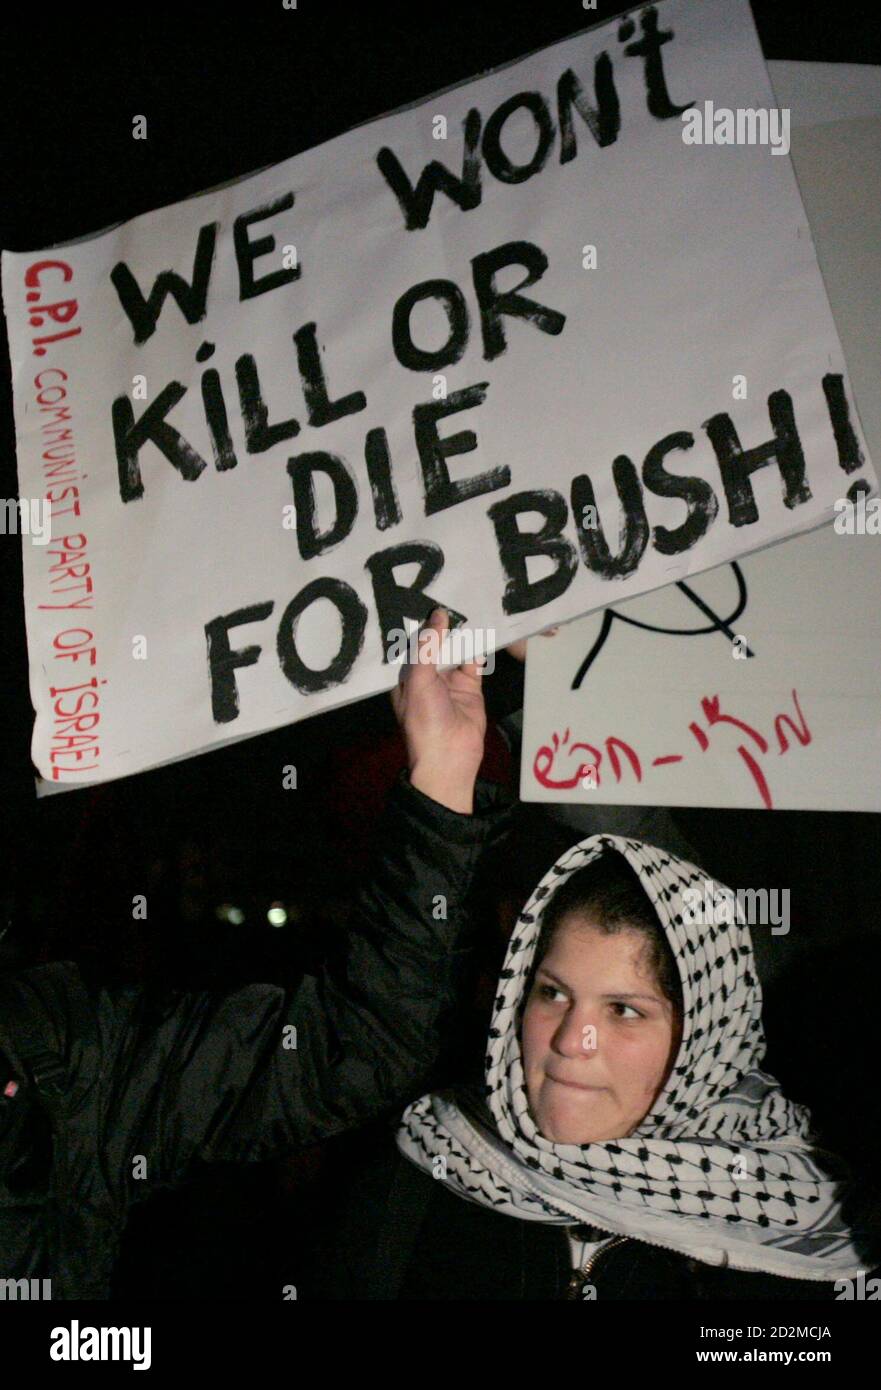 A left-wing Israeli activist takes part in a protest outside the U.S. Consulate in Jerusalem, January 9, 2008. U.S. President George W. Bush on Wednesday began his first visit as U.S. president to Israel and the Palestinian territories, saying he saw a new opportunity for peace and that both sides were ready to make tough concessions. REUTERS/Eliana Aponte (JERUSALEM) Stock Photo